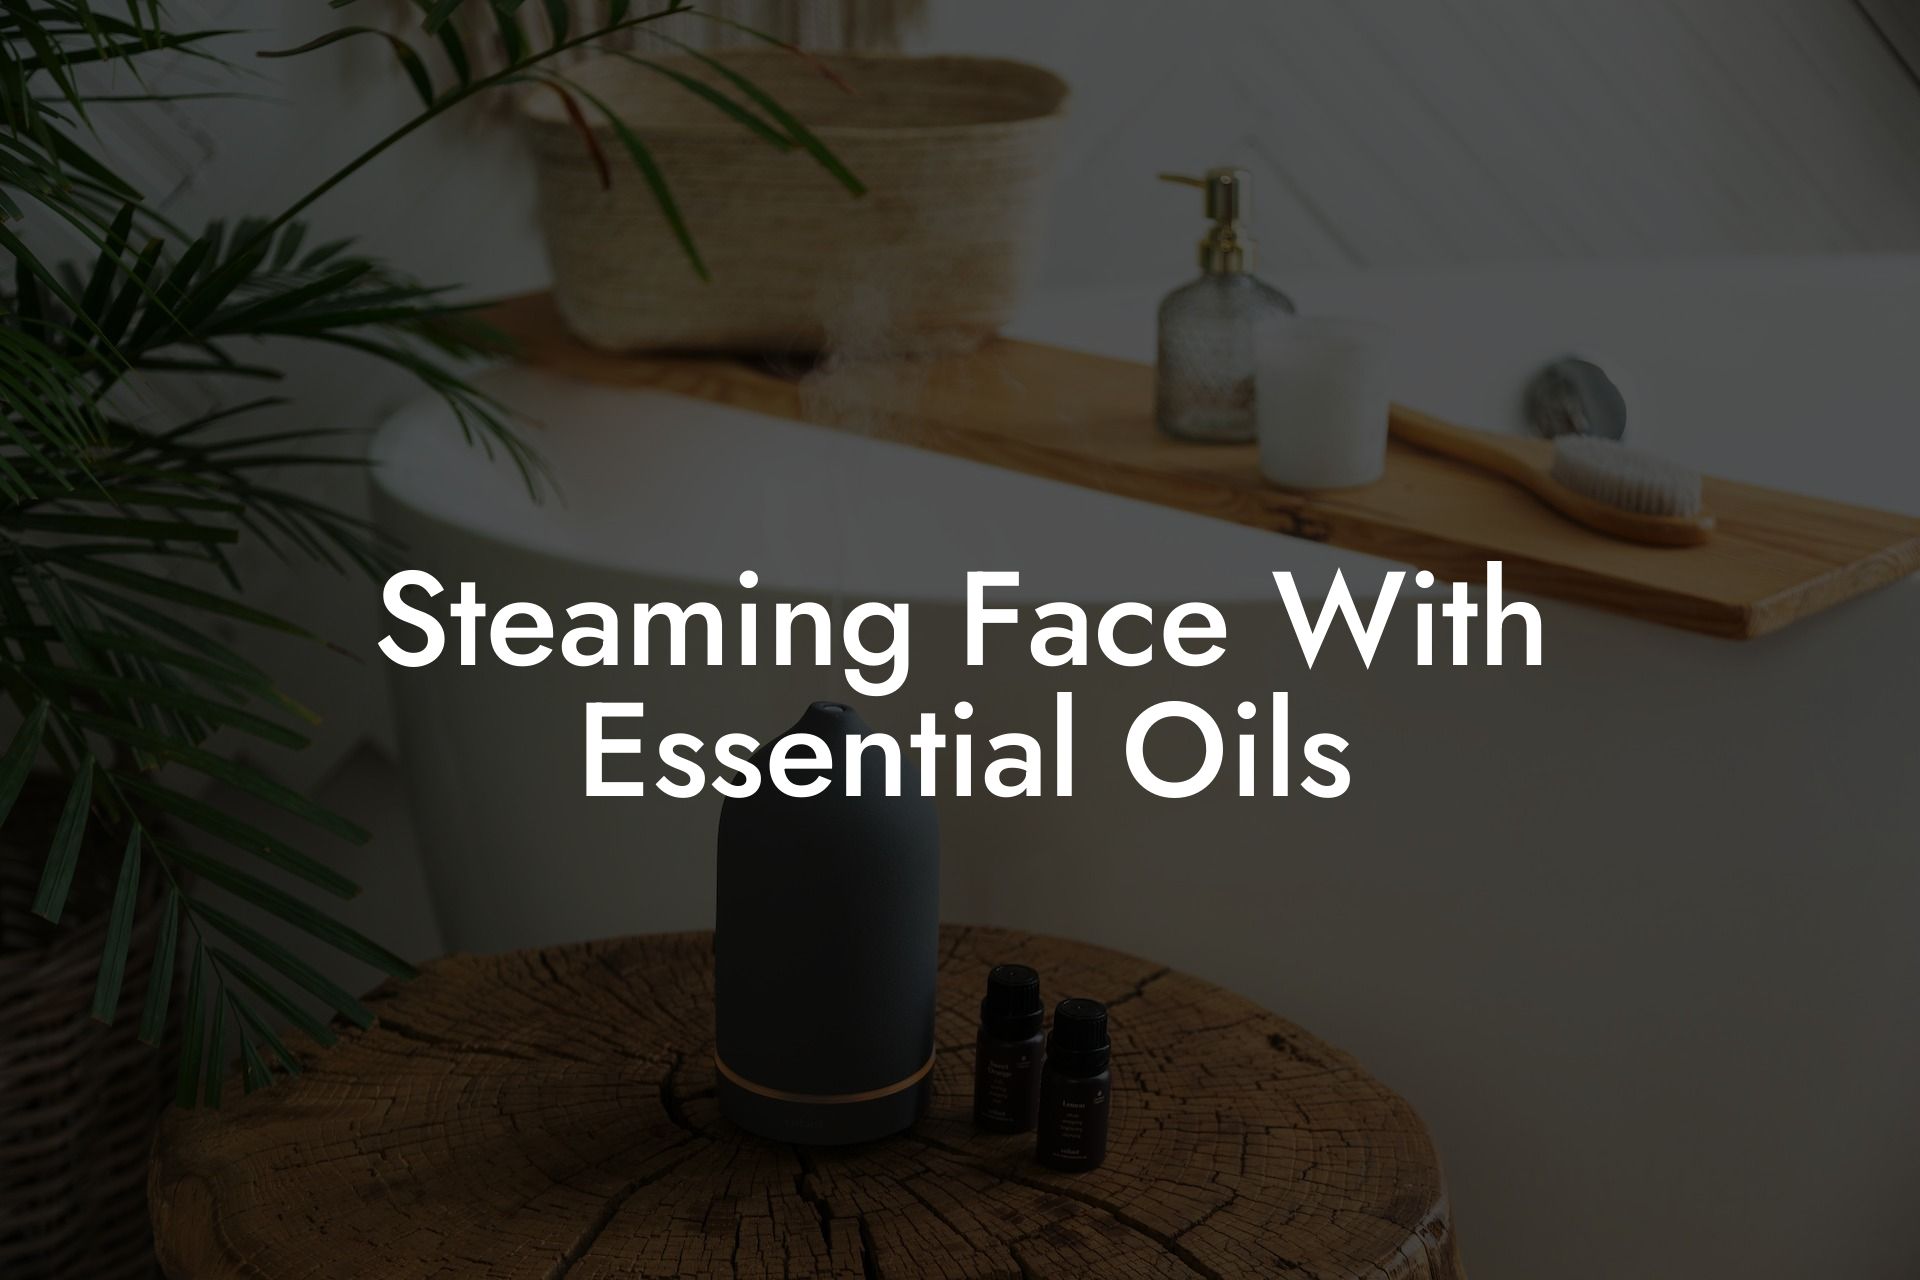 Steaming Face With Essential Oils